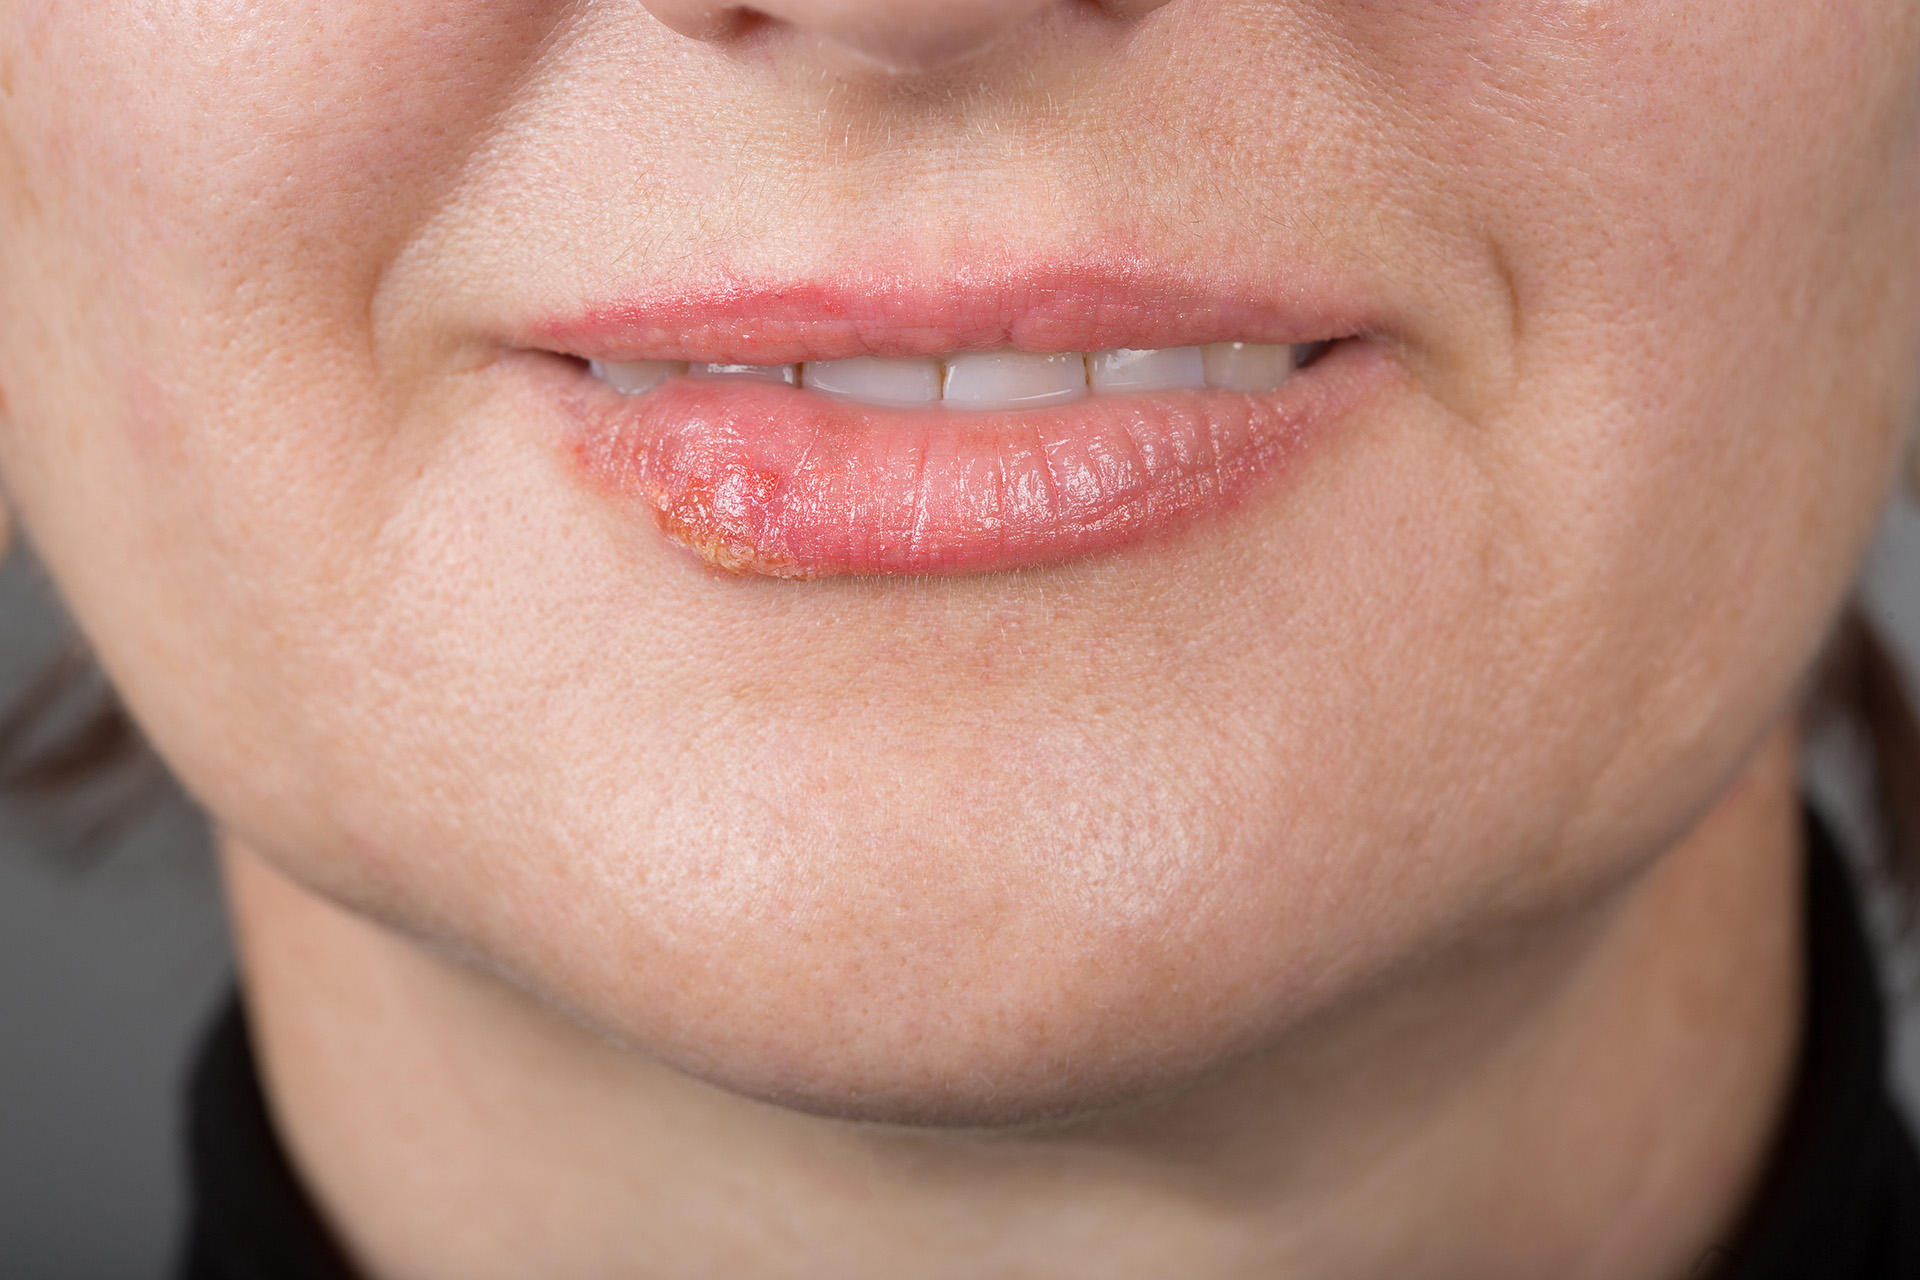 Mouth Ulcer and Canker Sores - Essential Things You Need to Know